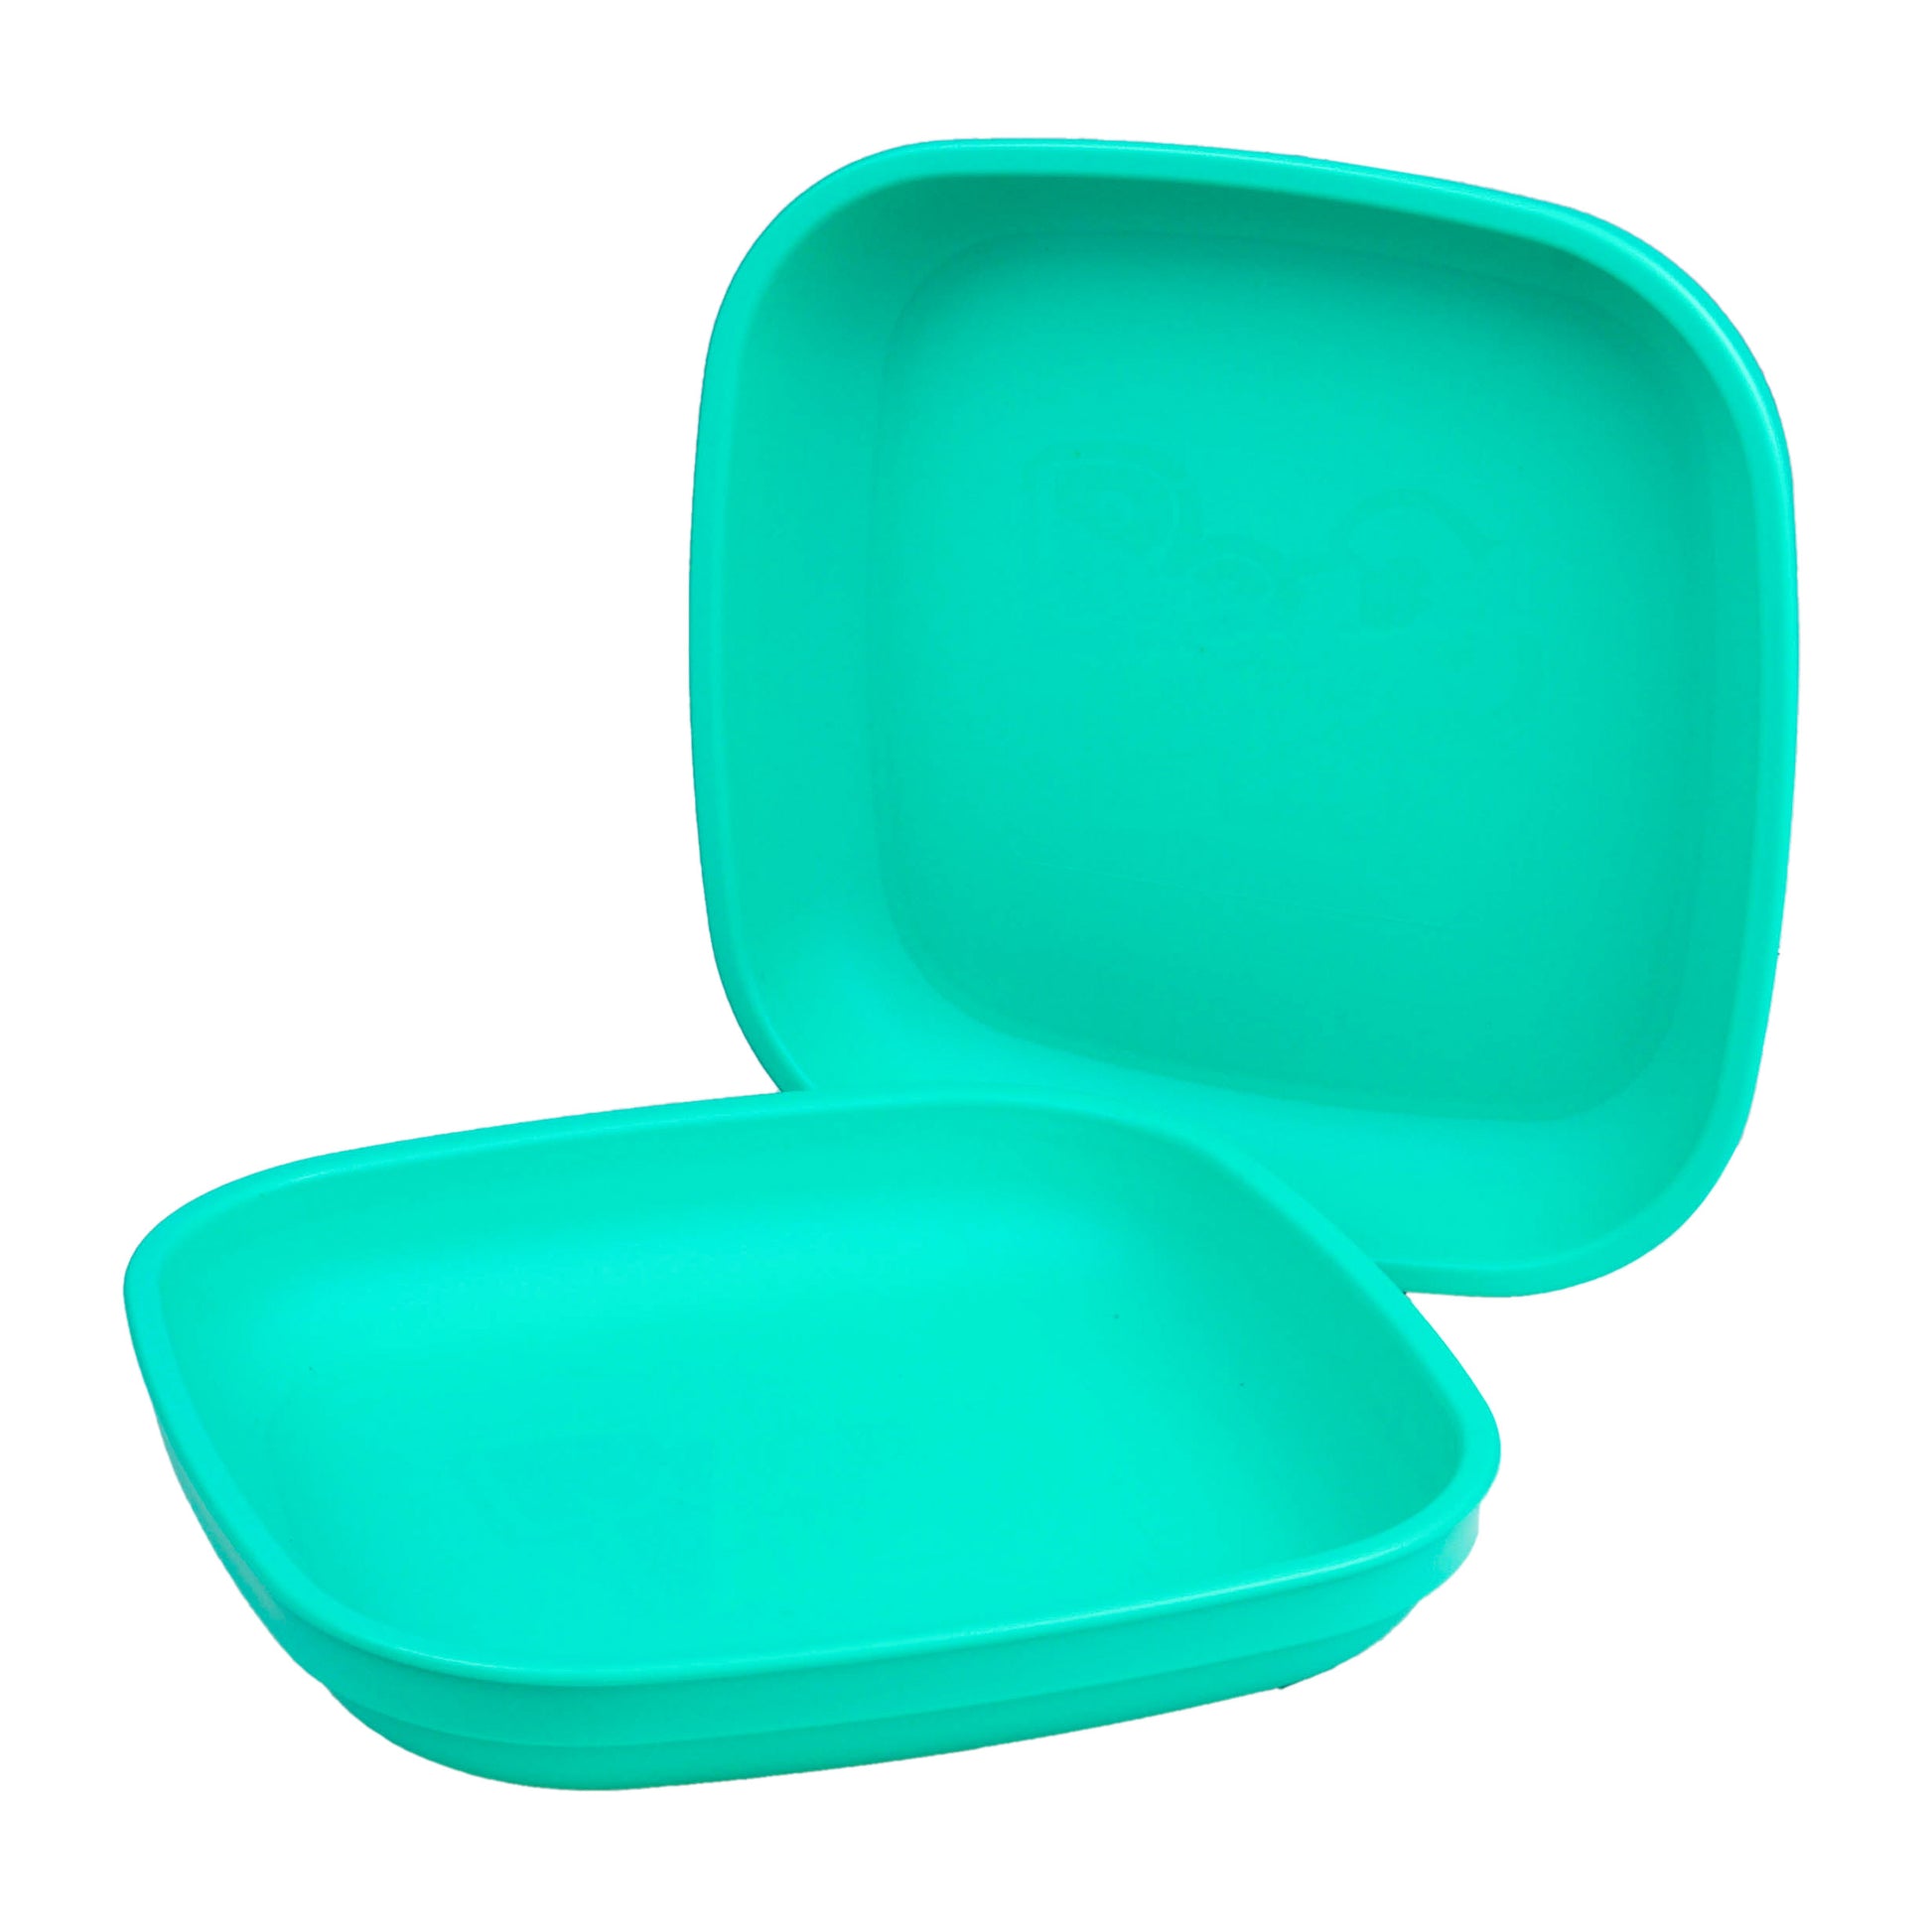 Re-Play Flat Plate Standard Size in Aqua from Bear & Moo